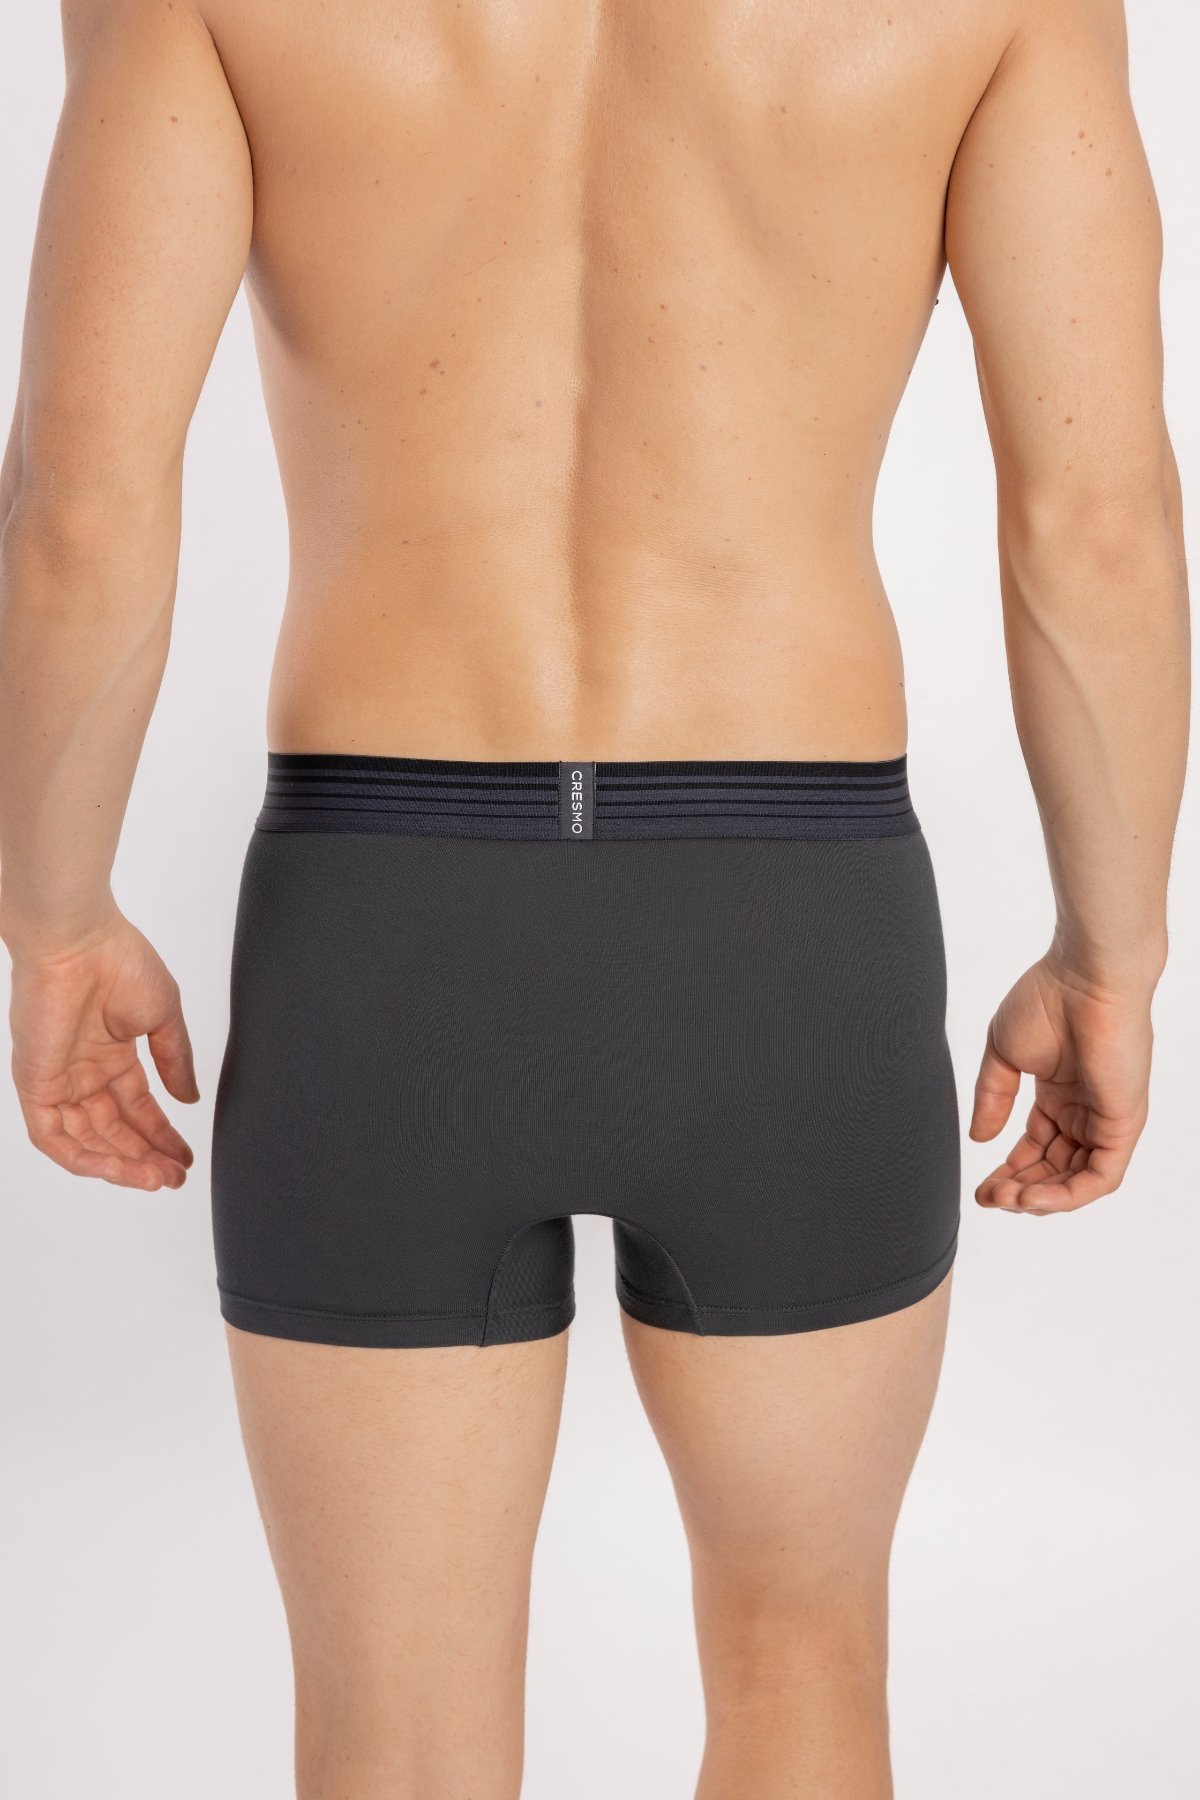 CRESMO | CRESMO Men's Anti-Microbial Micro Modal Underwear Breathable Ultra Soft Trunk (Pack of 3) 2